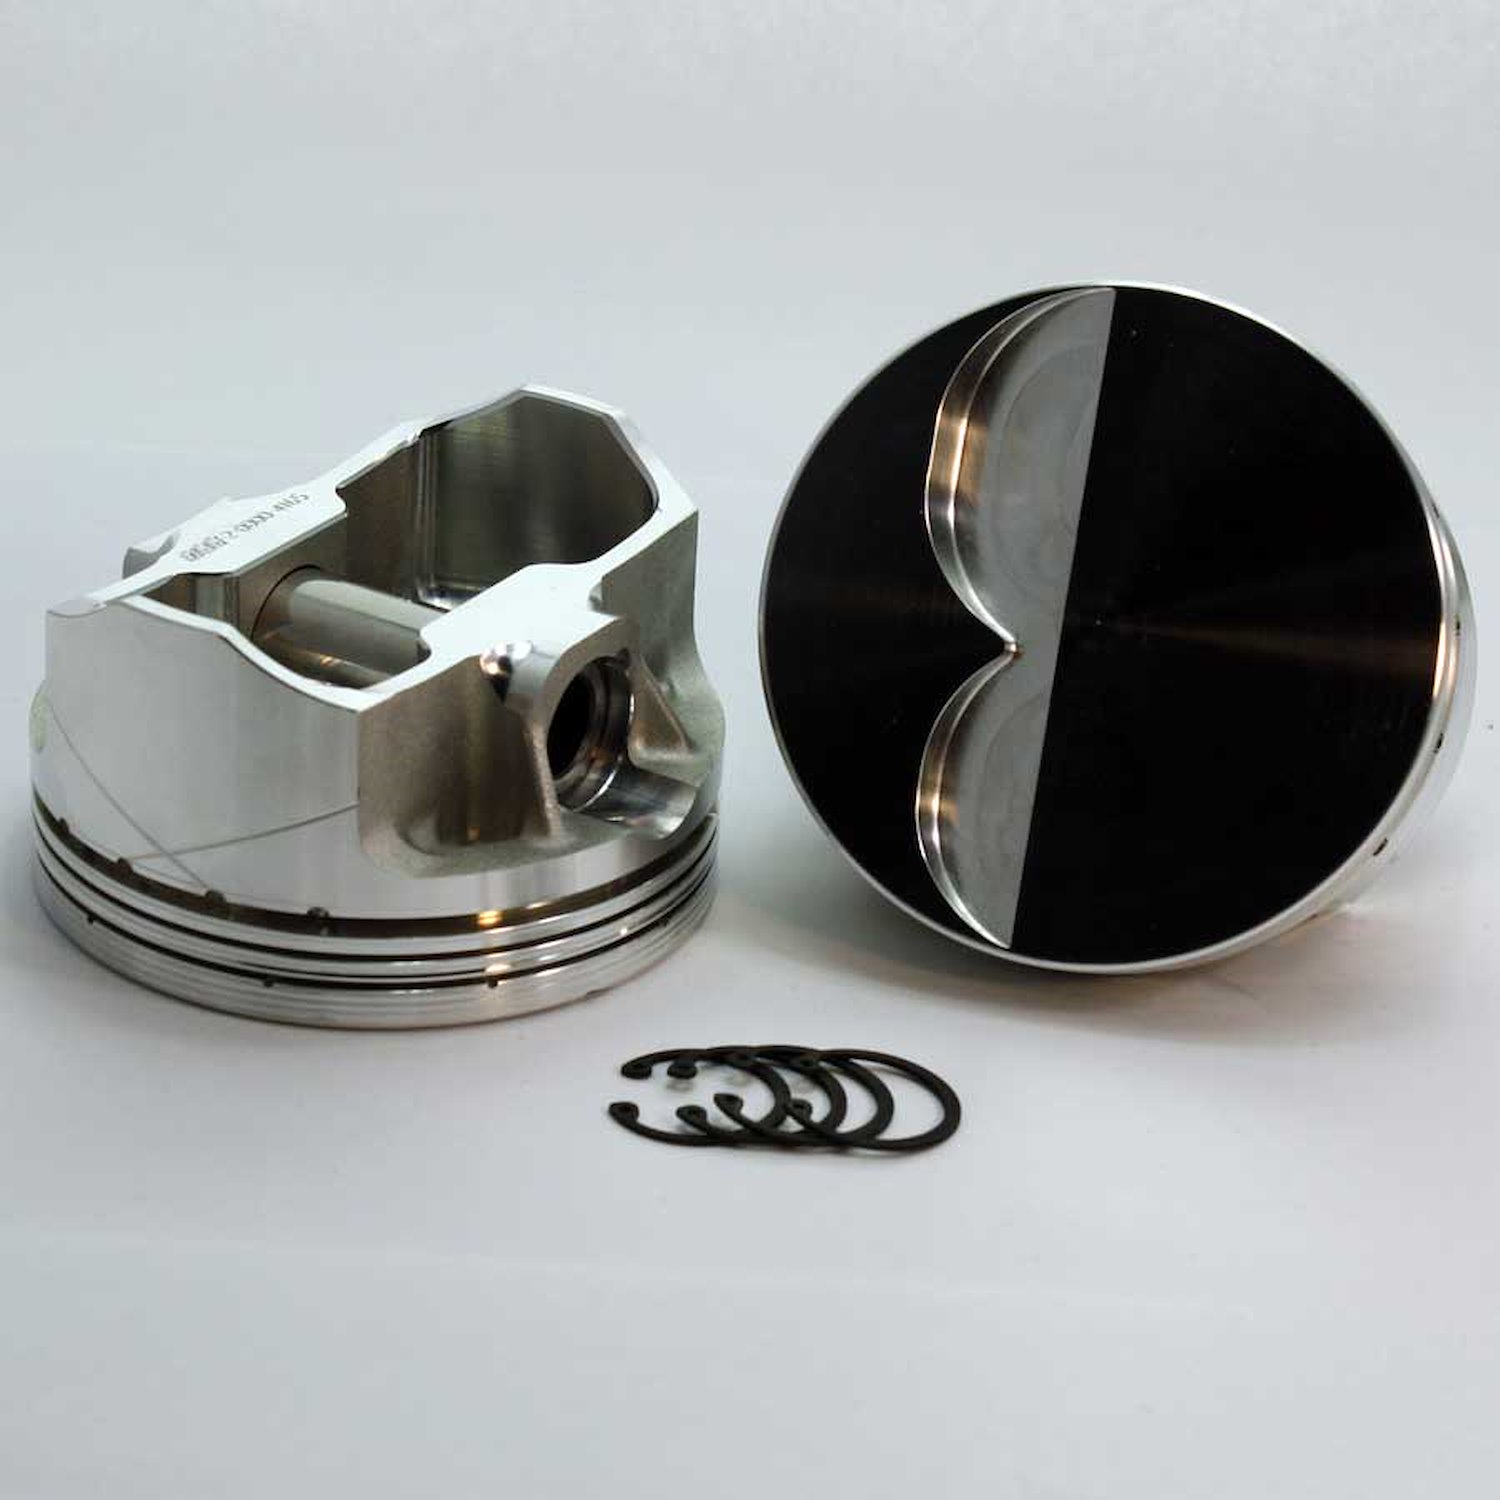 1-3400-4030 FX-Series Flat Top Piston Set for 1962-2001 Small Block Ford 289-302, 4.030 in. Bore, -4cc Volume [OEM Stroke]